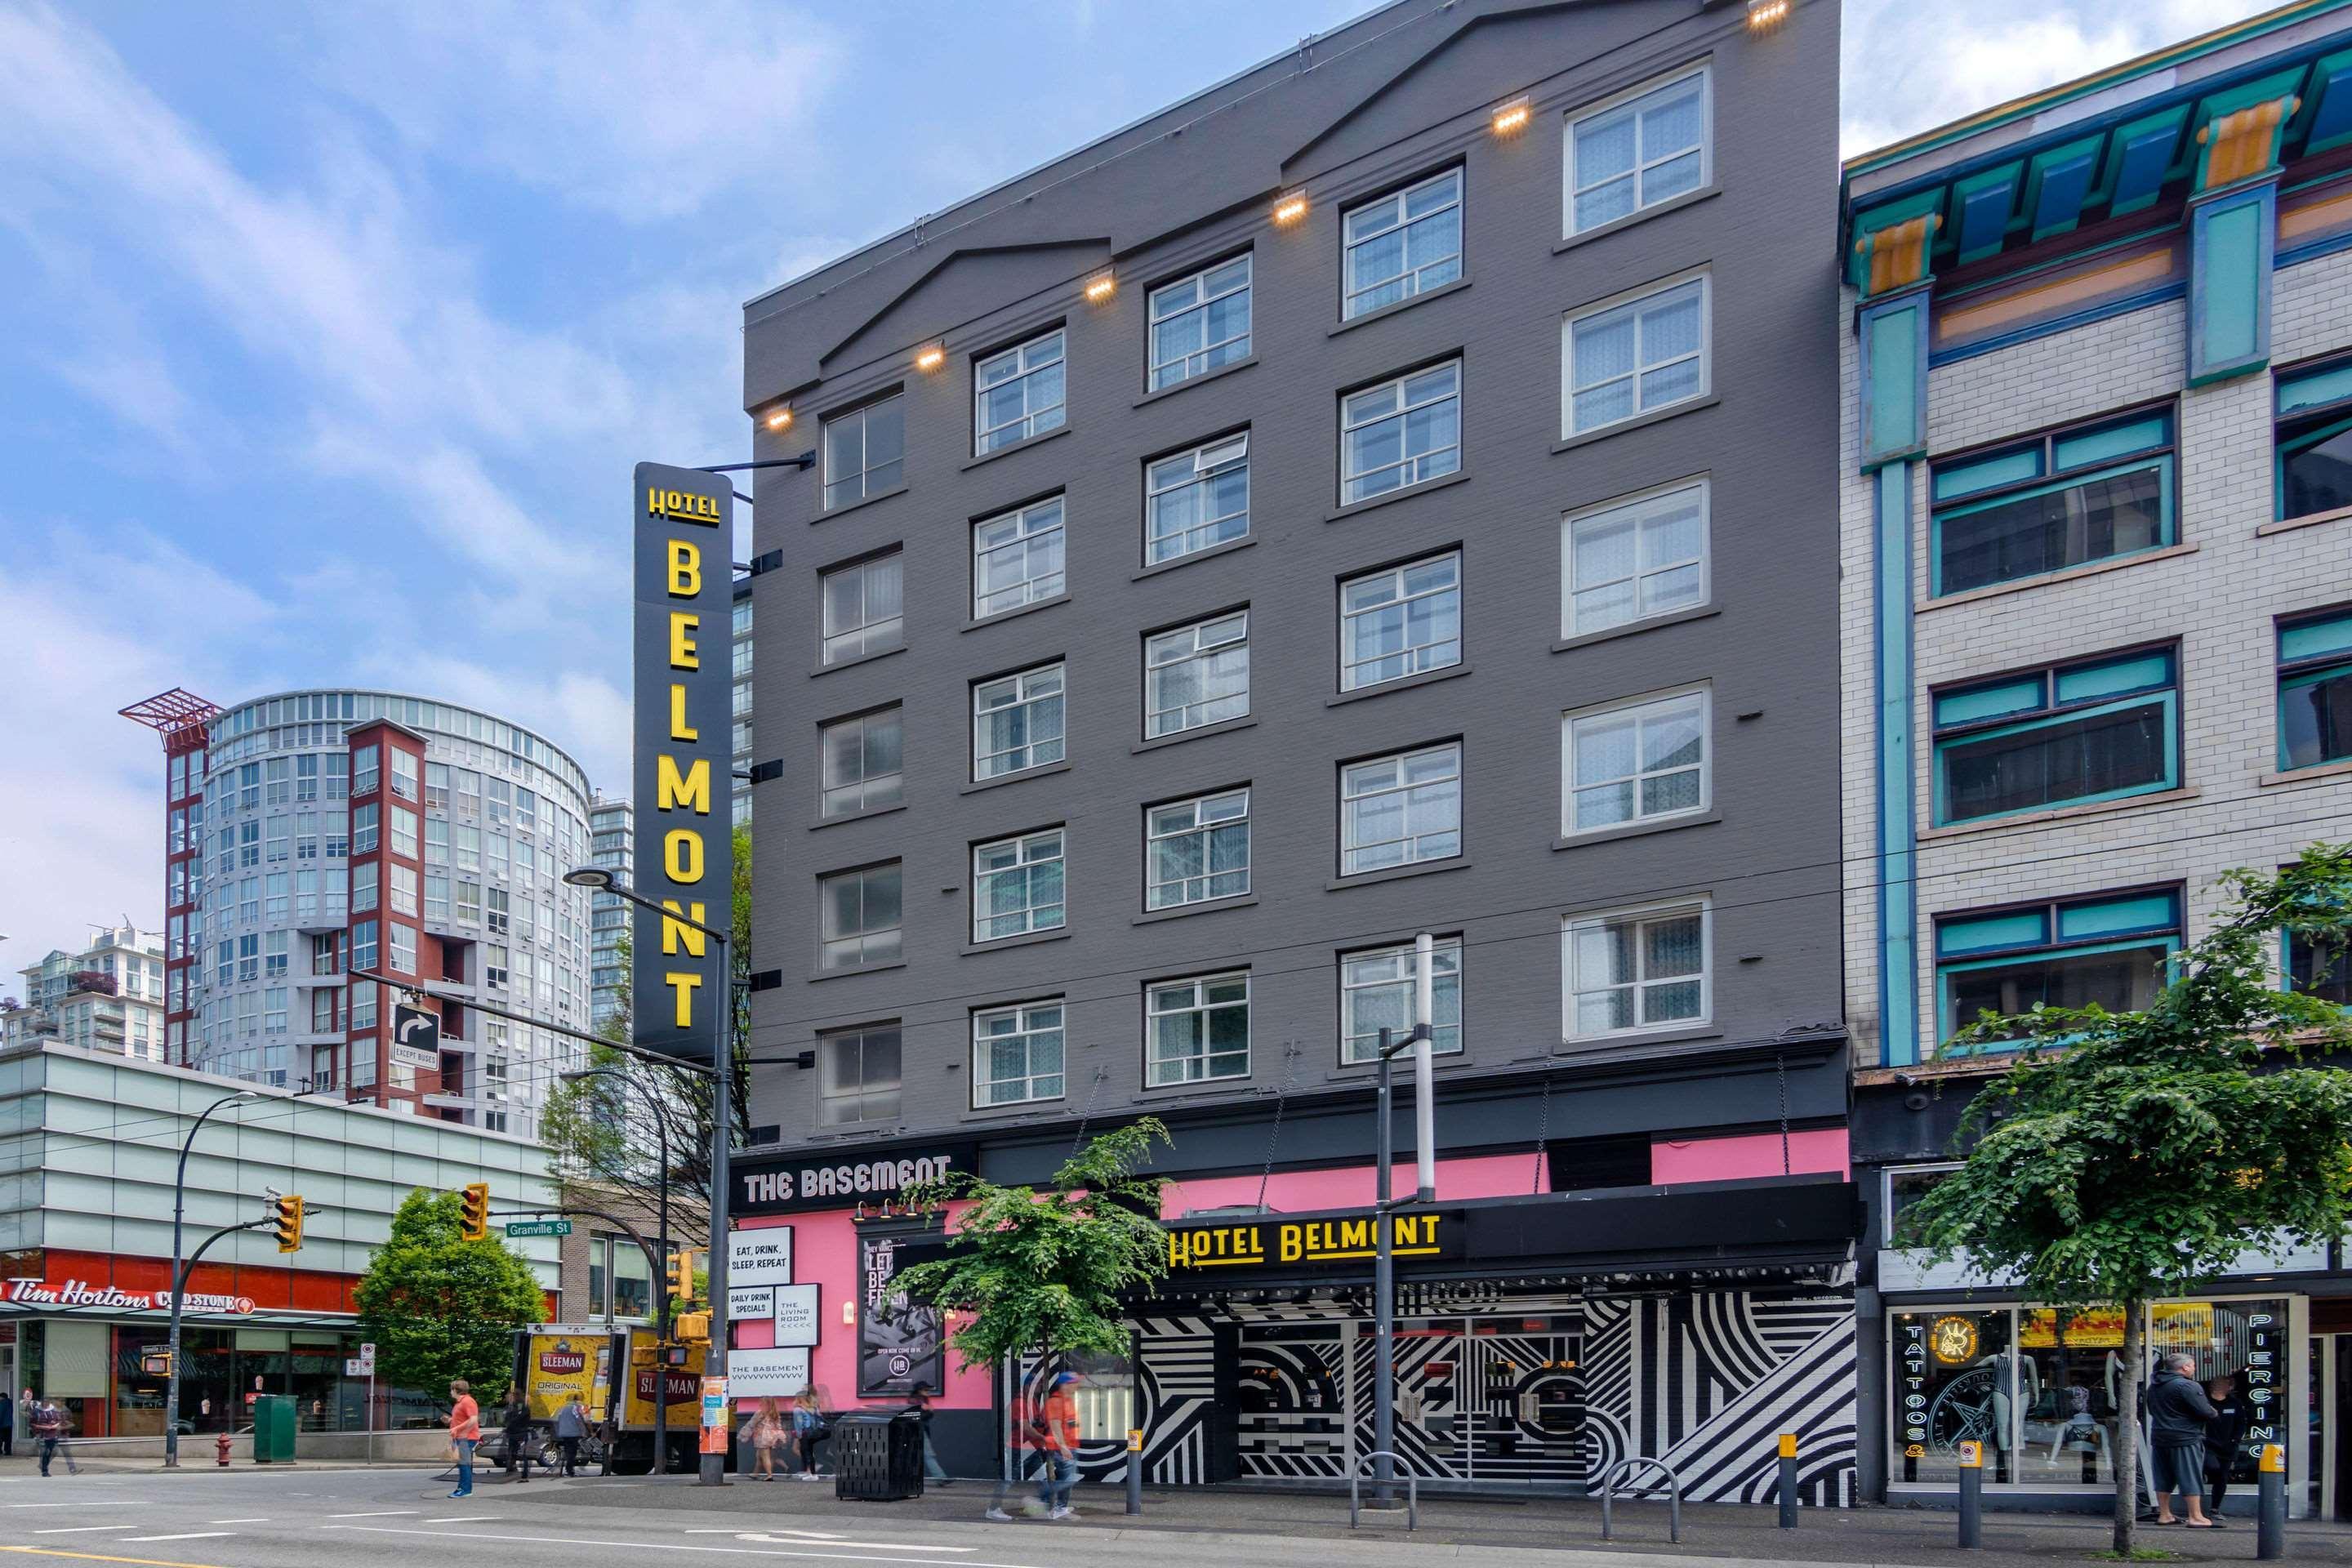 Hotel Belmont Vancouver Mgallery Bagian luar foto